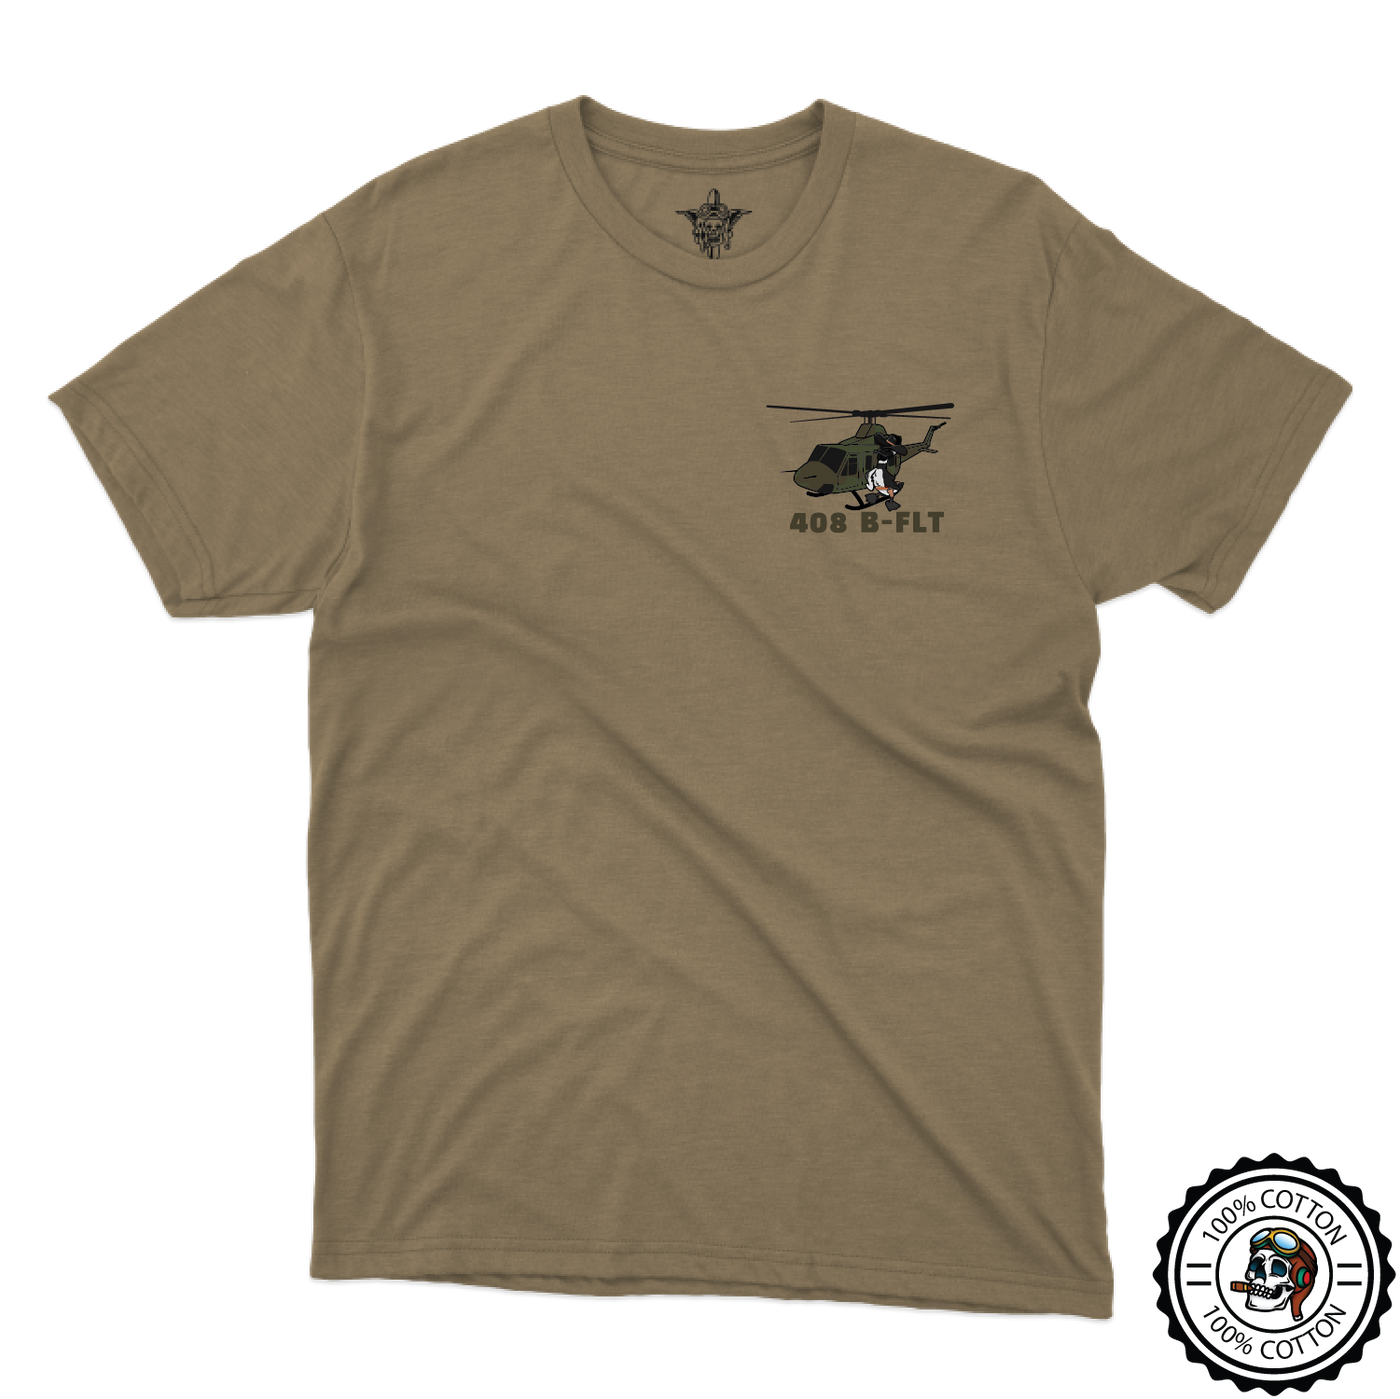 408 Tactical Helicopter Squadron Tan 499 T-Shirt